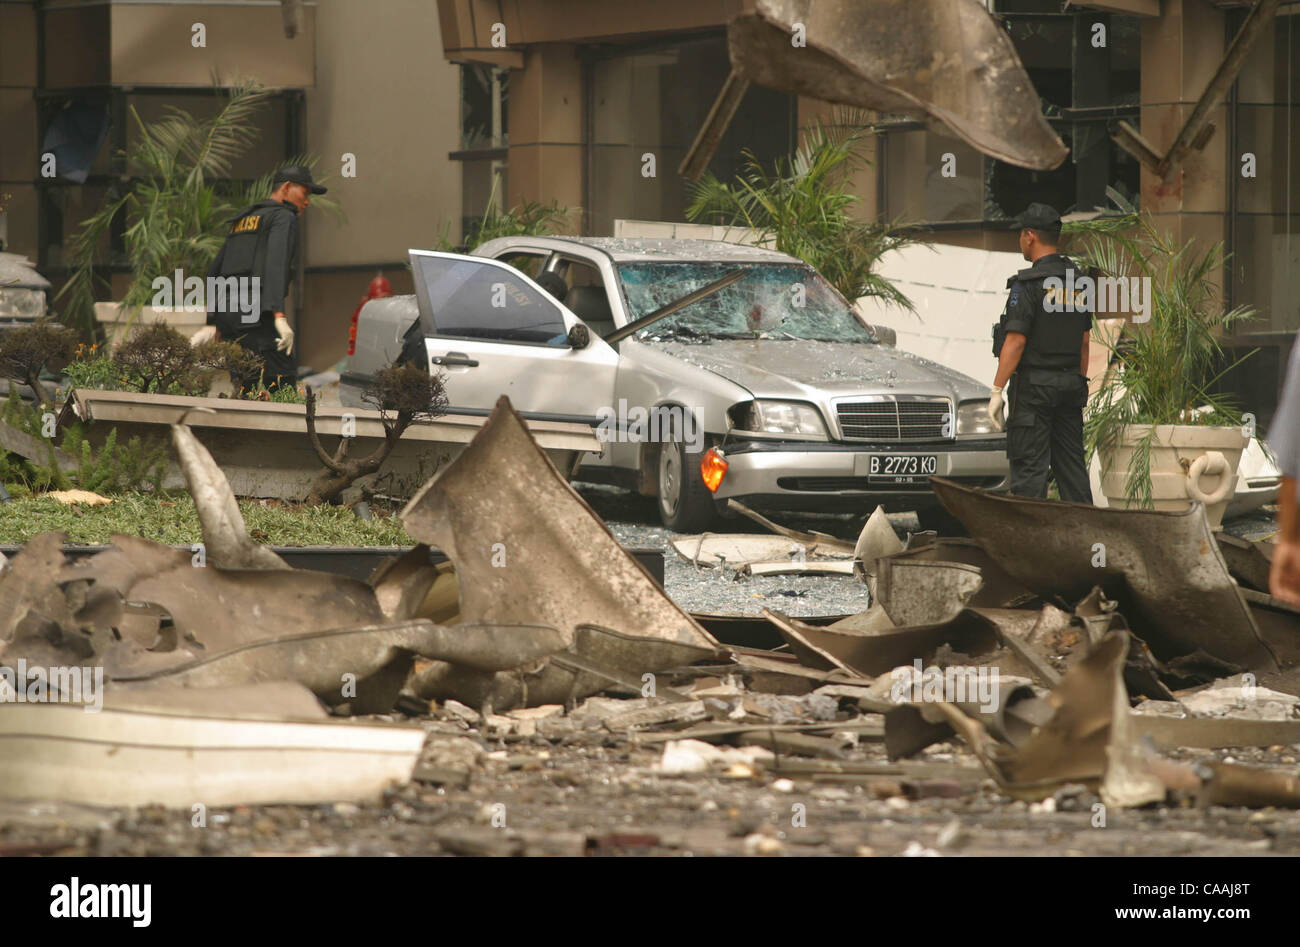 Aug 05, 2003; Jakarta, DKI, Indonesia; An explosion occur at JW Marriott Hotel in downtown Jakarta, killing 14, wounding 100 and damaging nearby buildings. The cell phone detonated a bomb in a Toyota Kijang van.  The terrorism bombing happened 2 days before the verdict for Bali bomber Amrozi. Stock Photo